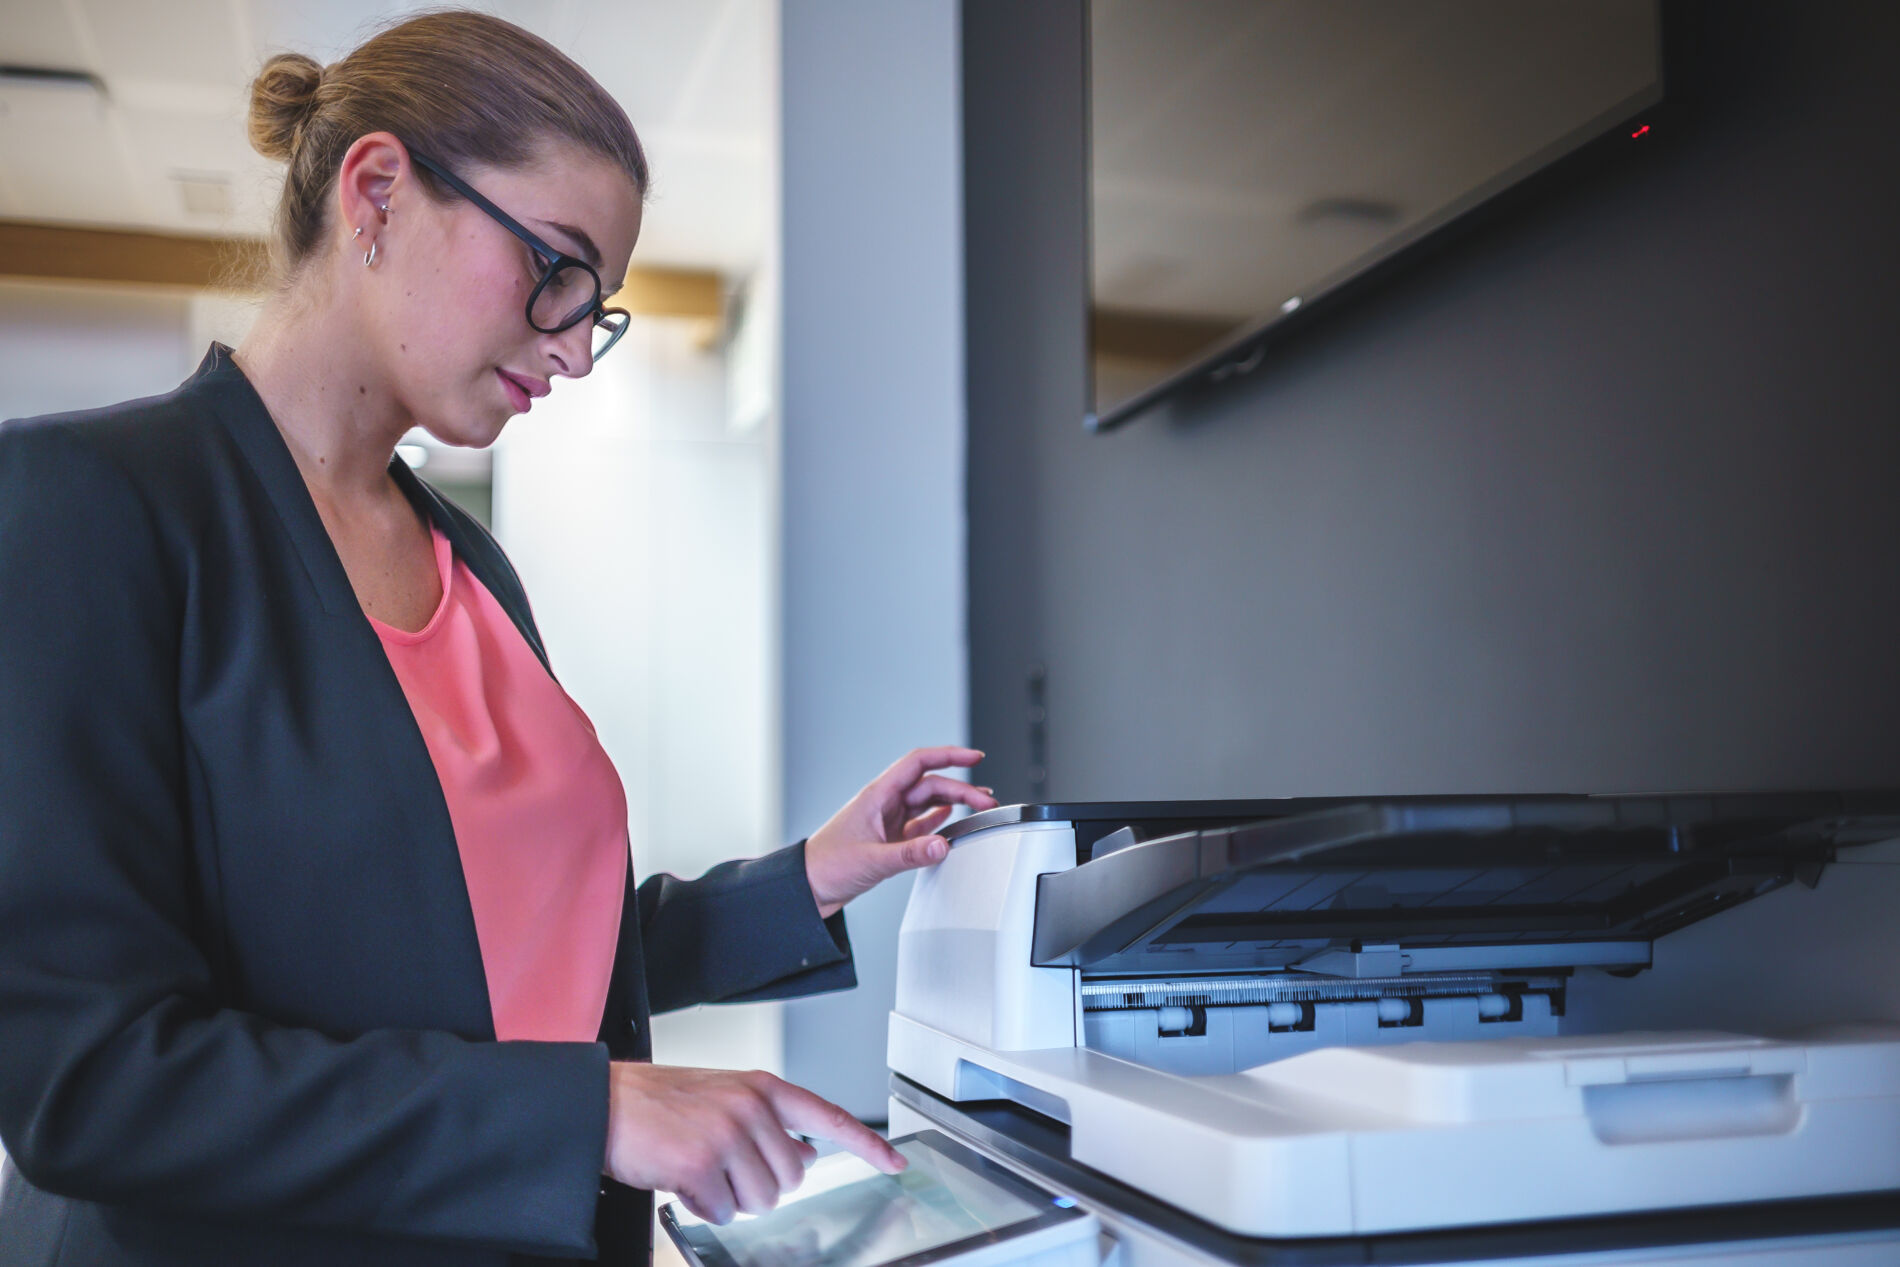 Businesswoman operating printing machine in office